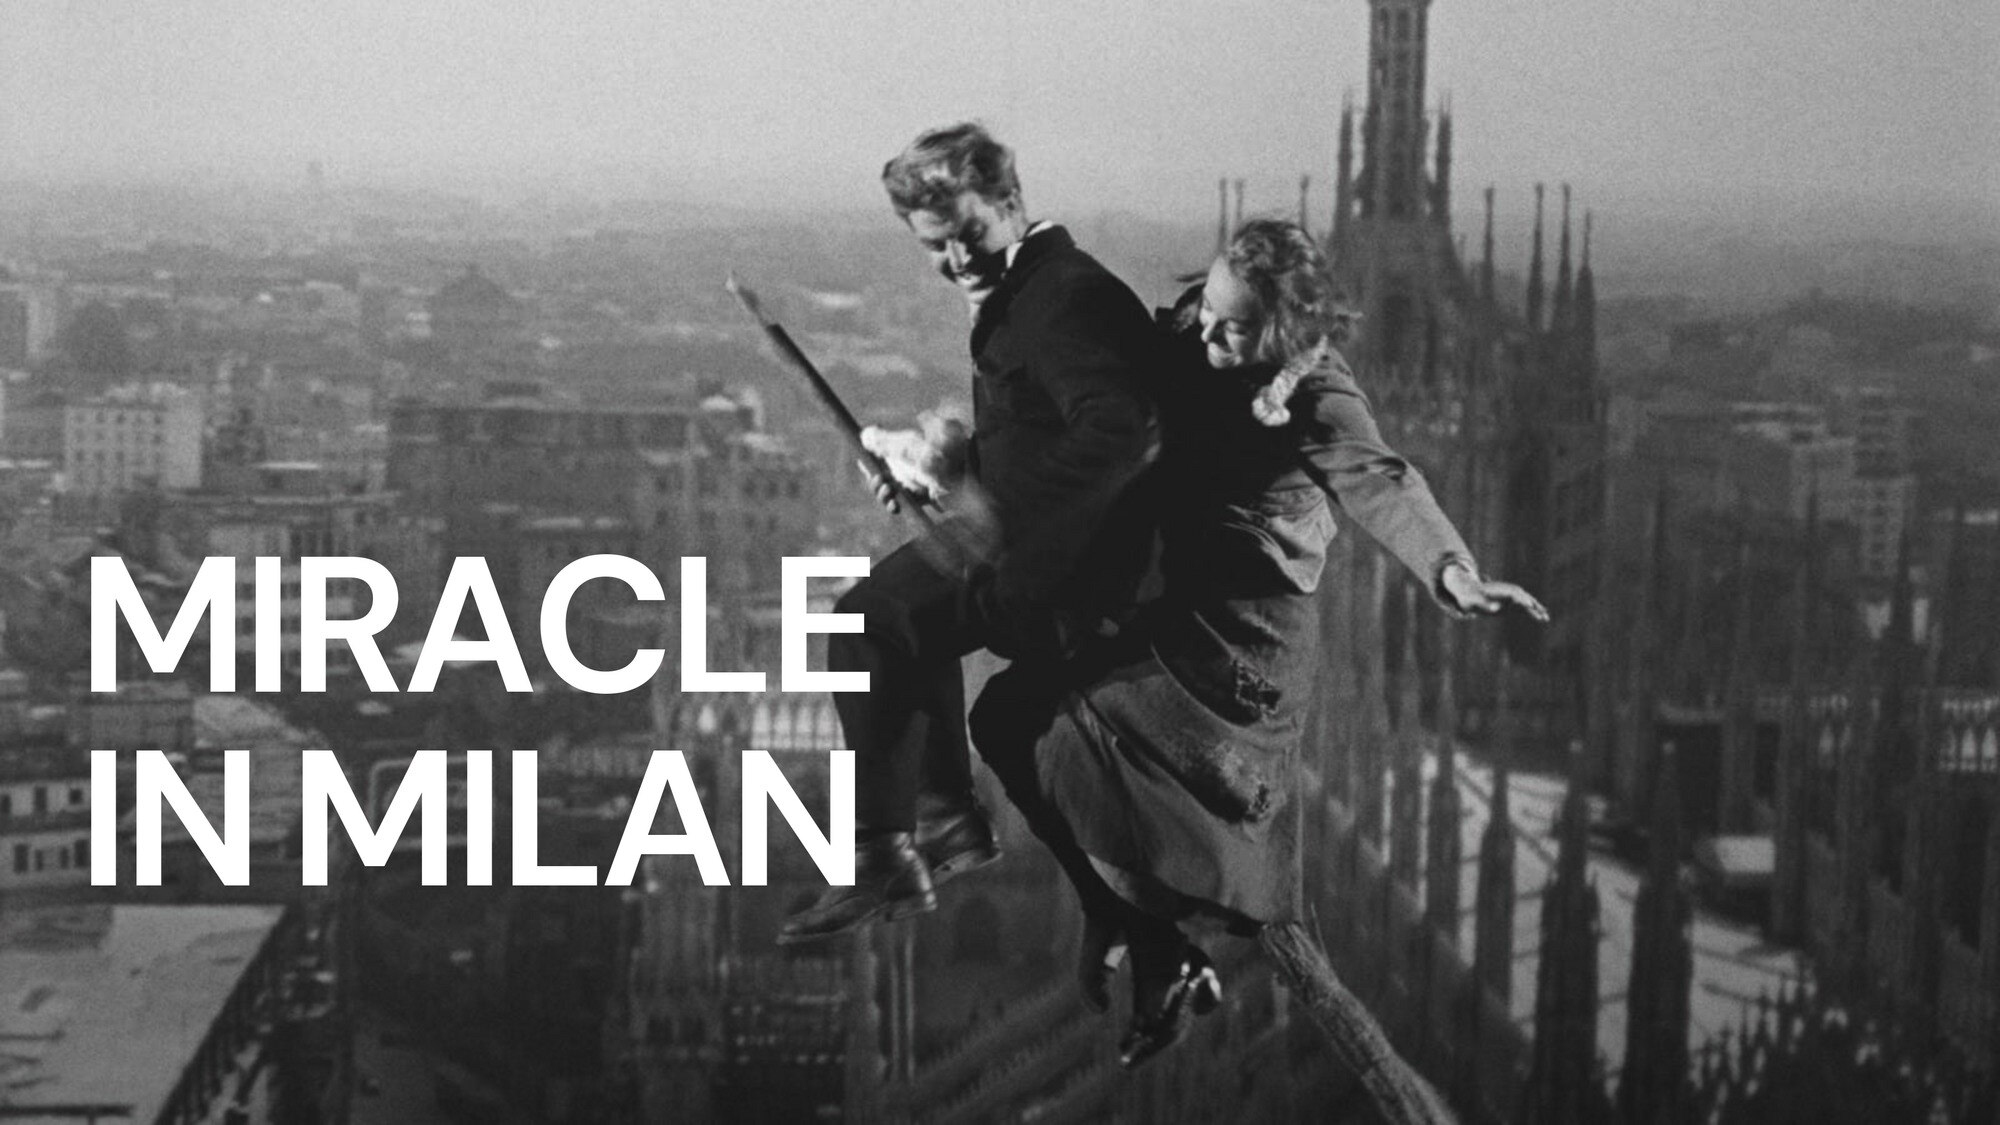 33-facts-about-the-movie-miracle-in-milan